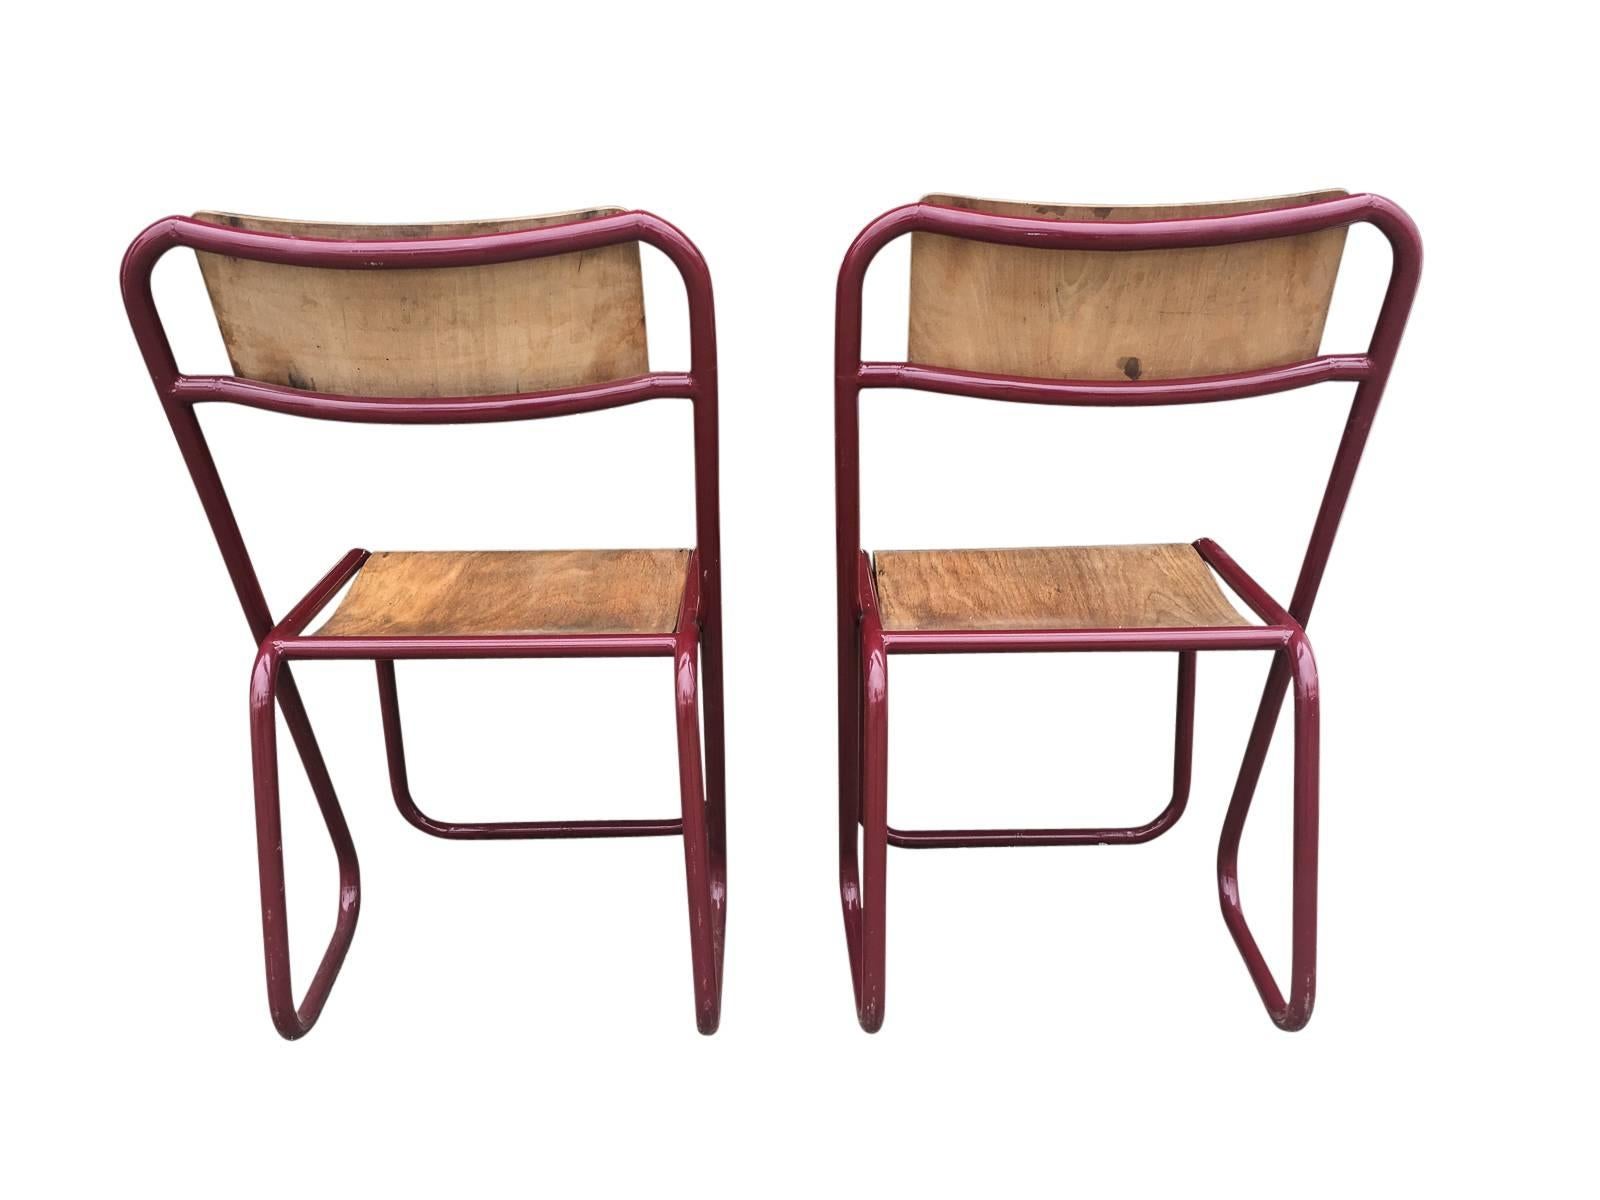 Rare Pair of French Chairs 1